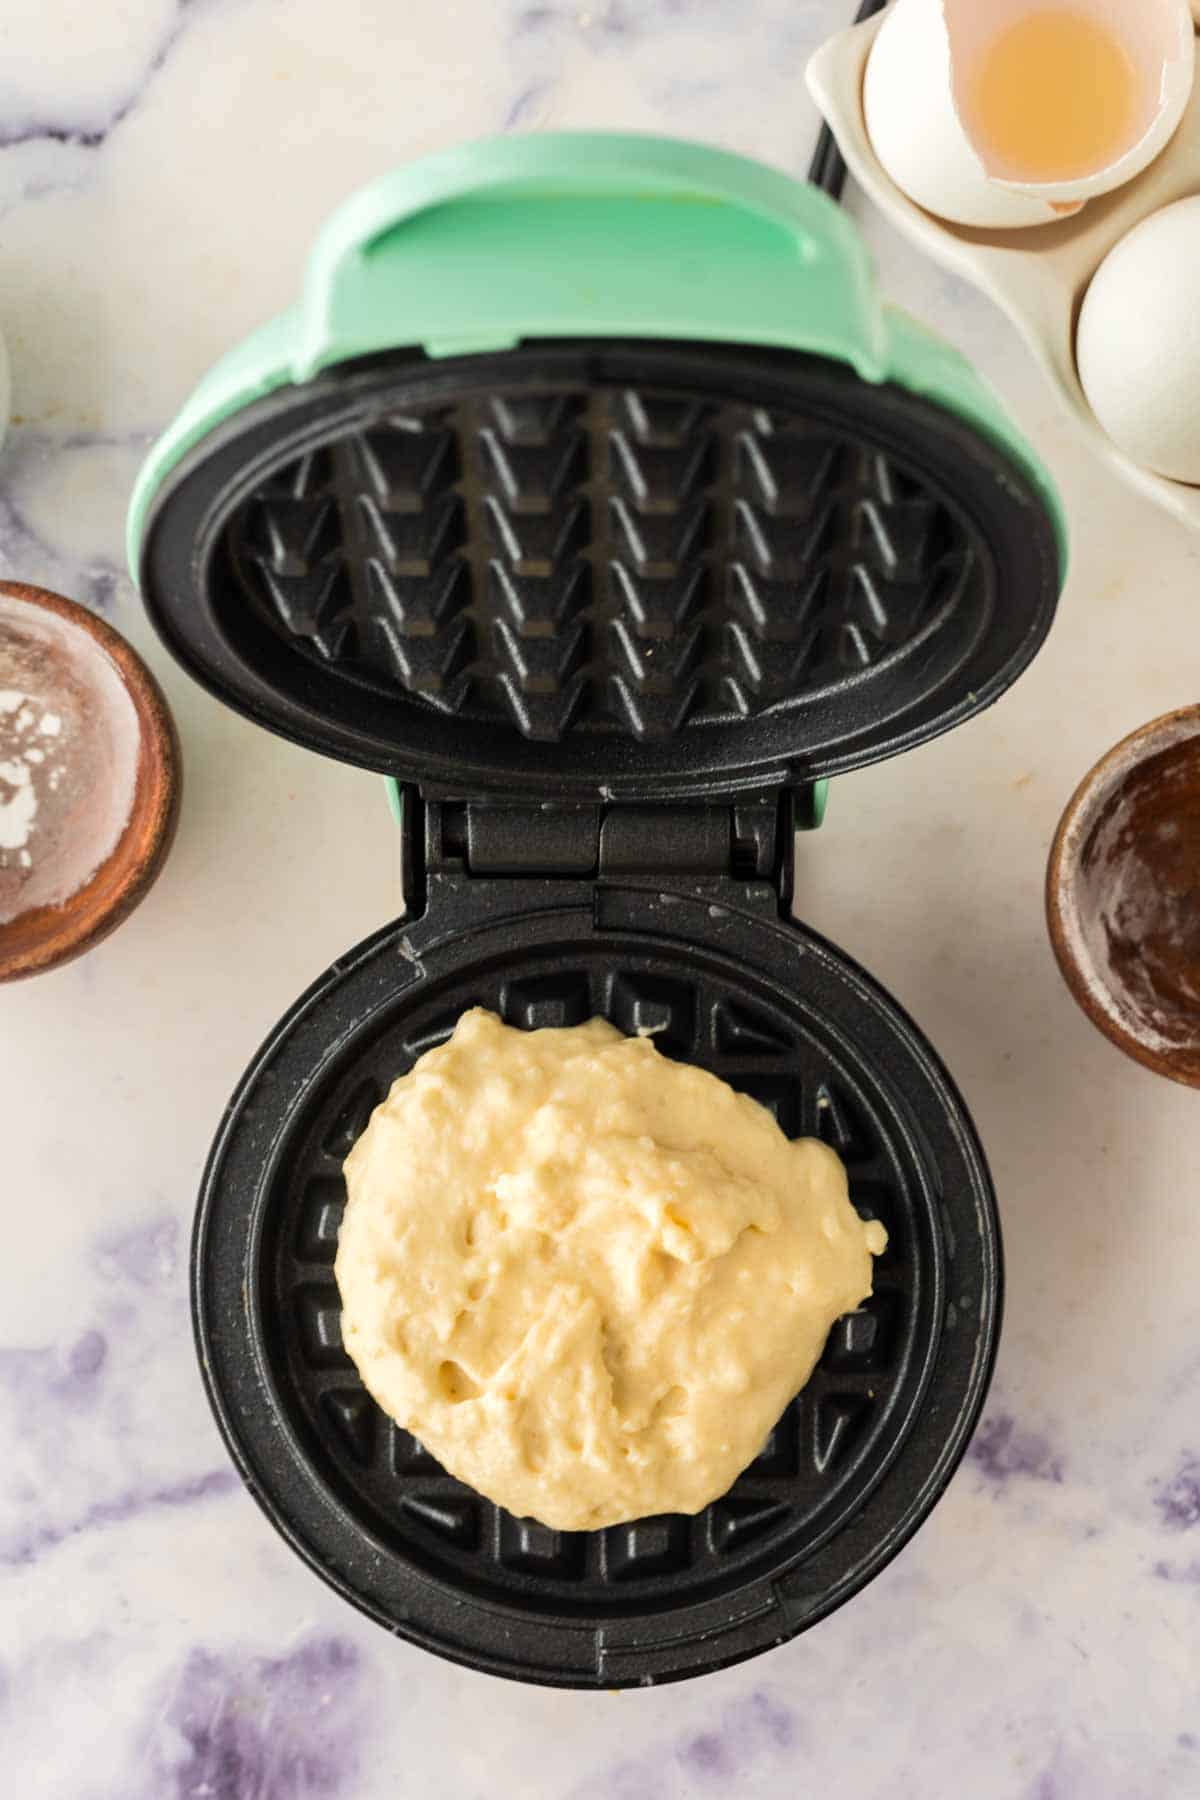 top view of a waffle iron and the batter going in